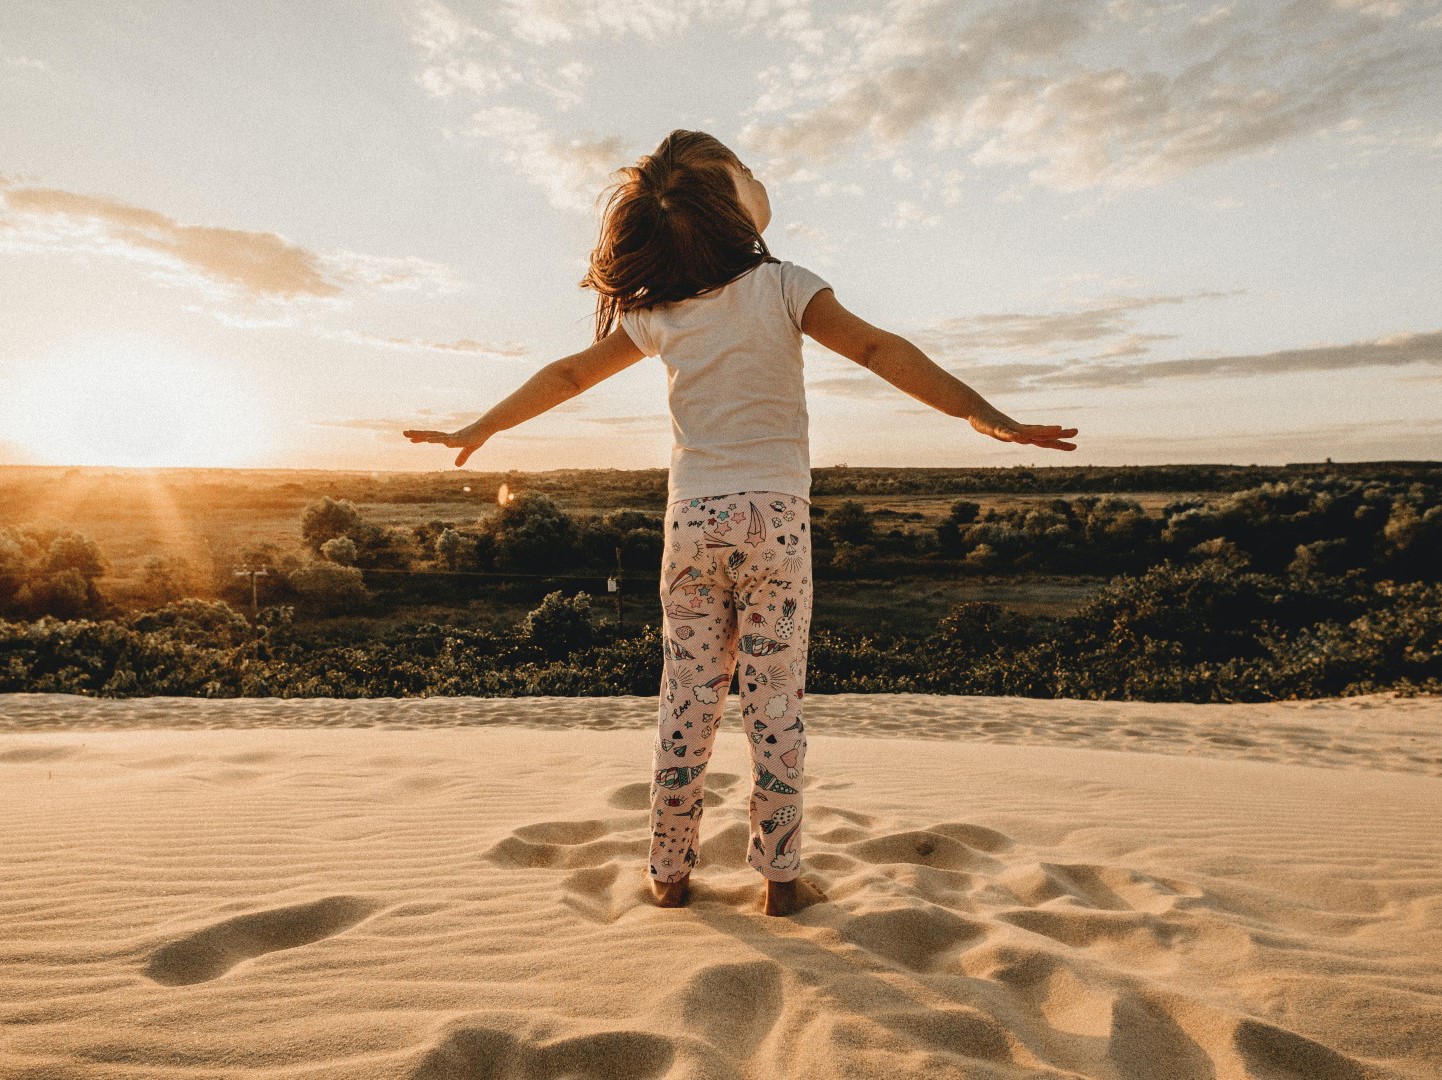 Cover picture of the article: Children's Day Activities - Algarve. In the photo, a child looks up to the sky with open arms while standing on a dune.